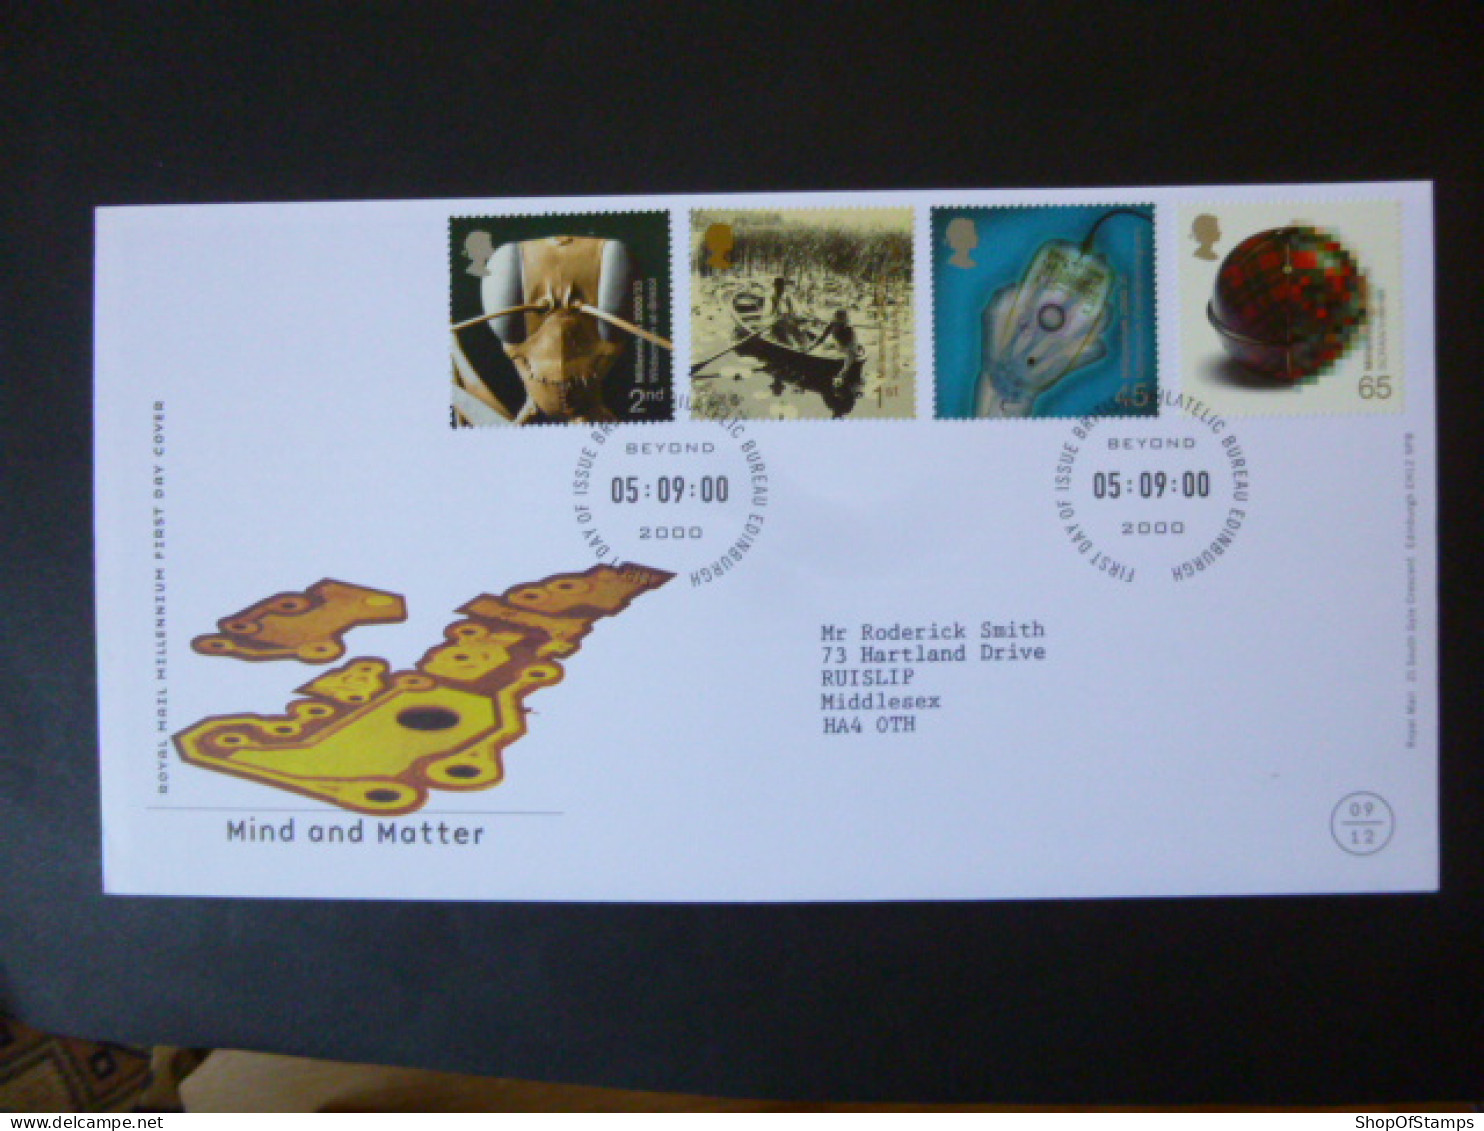 GREAT BRITAIN SG 2162-65 MILLENIUM PROJECTS, MIND AND MATTER FDC EDINBURGH - Unclassified